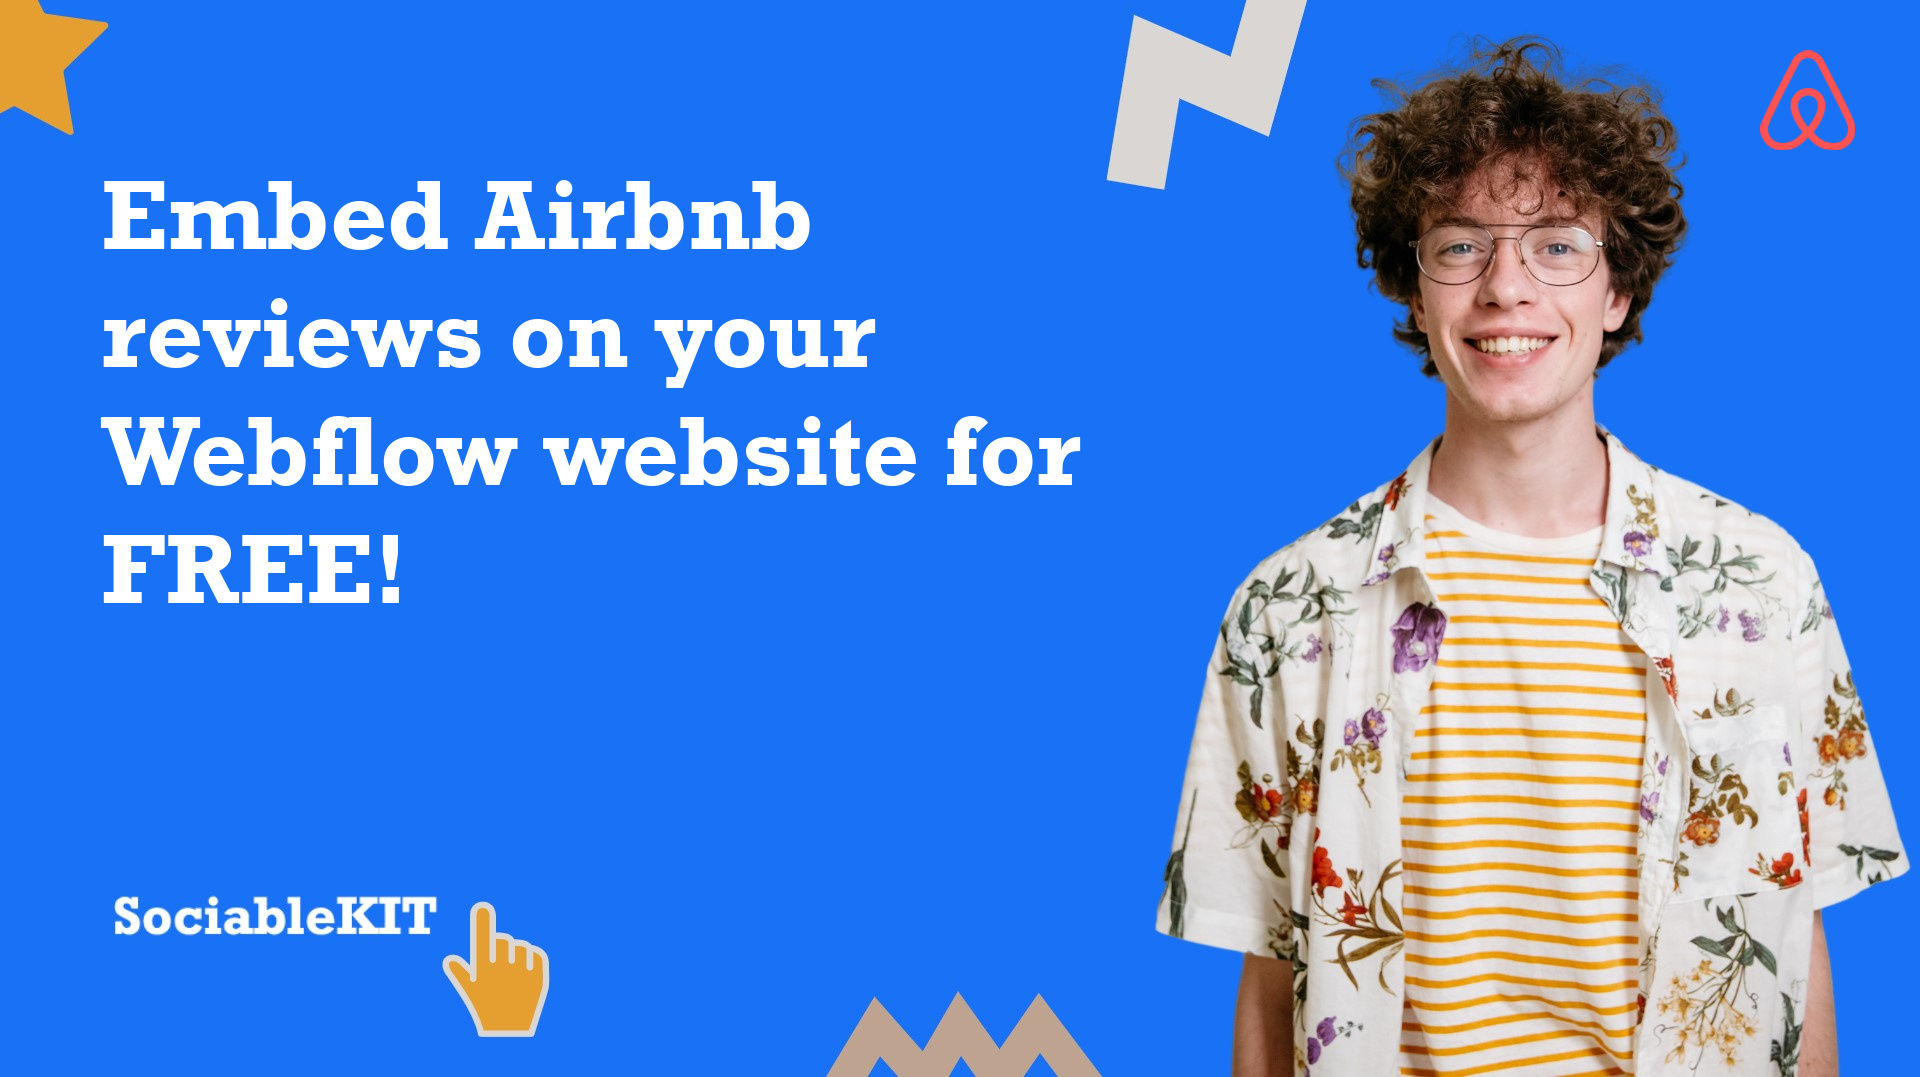 How to embed Airbnb reviews on your Webflow website for FREE?